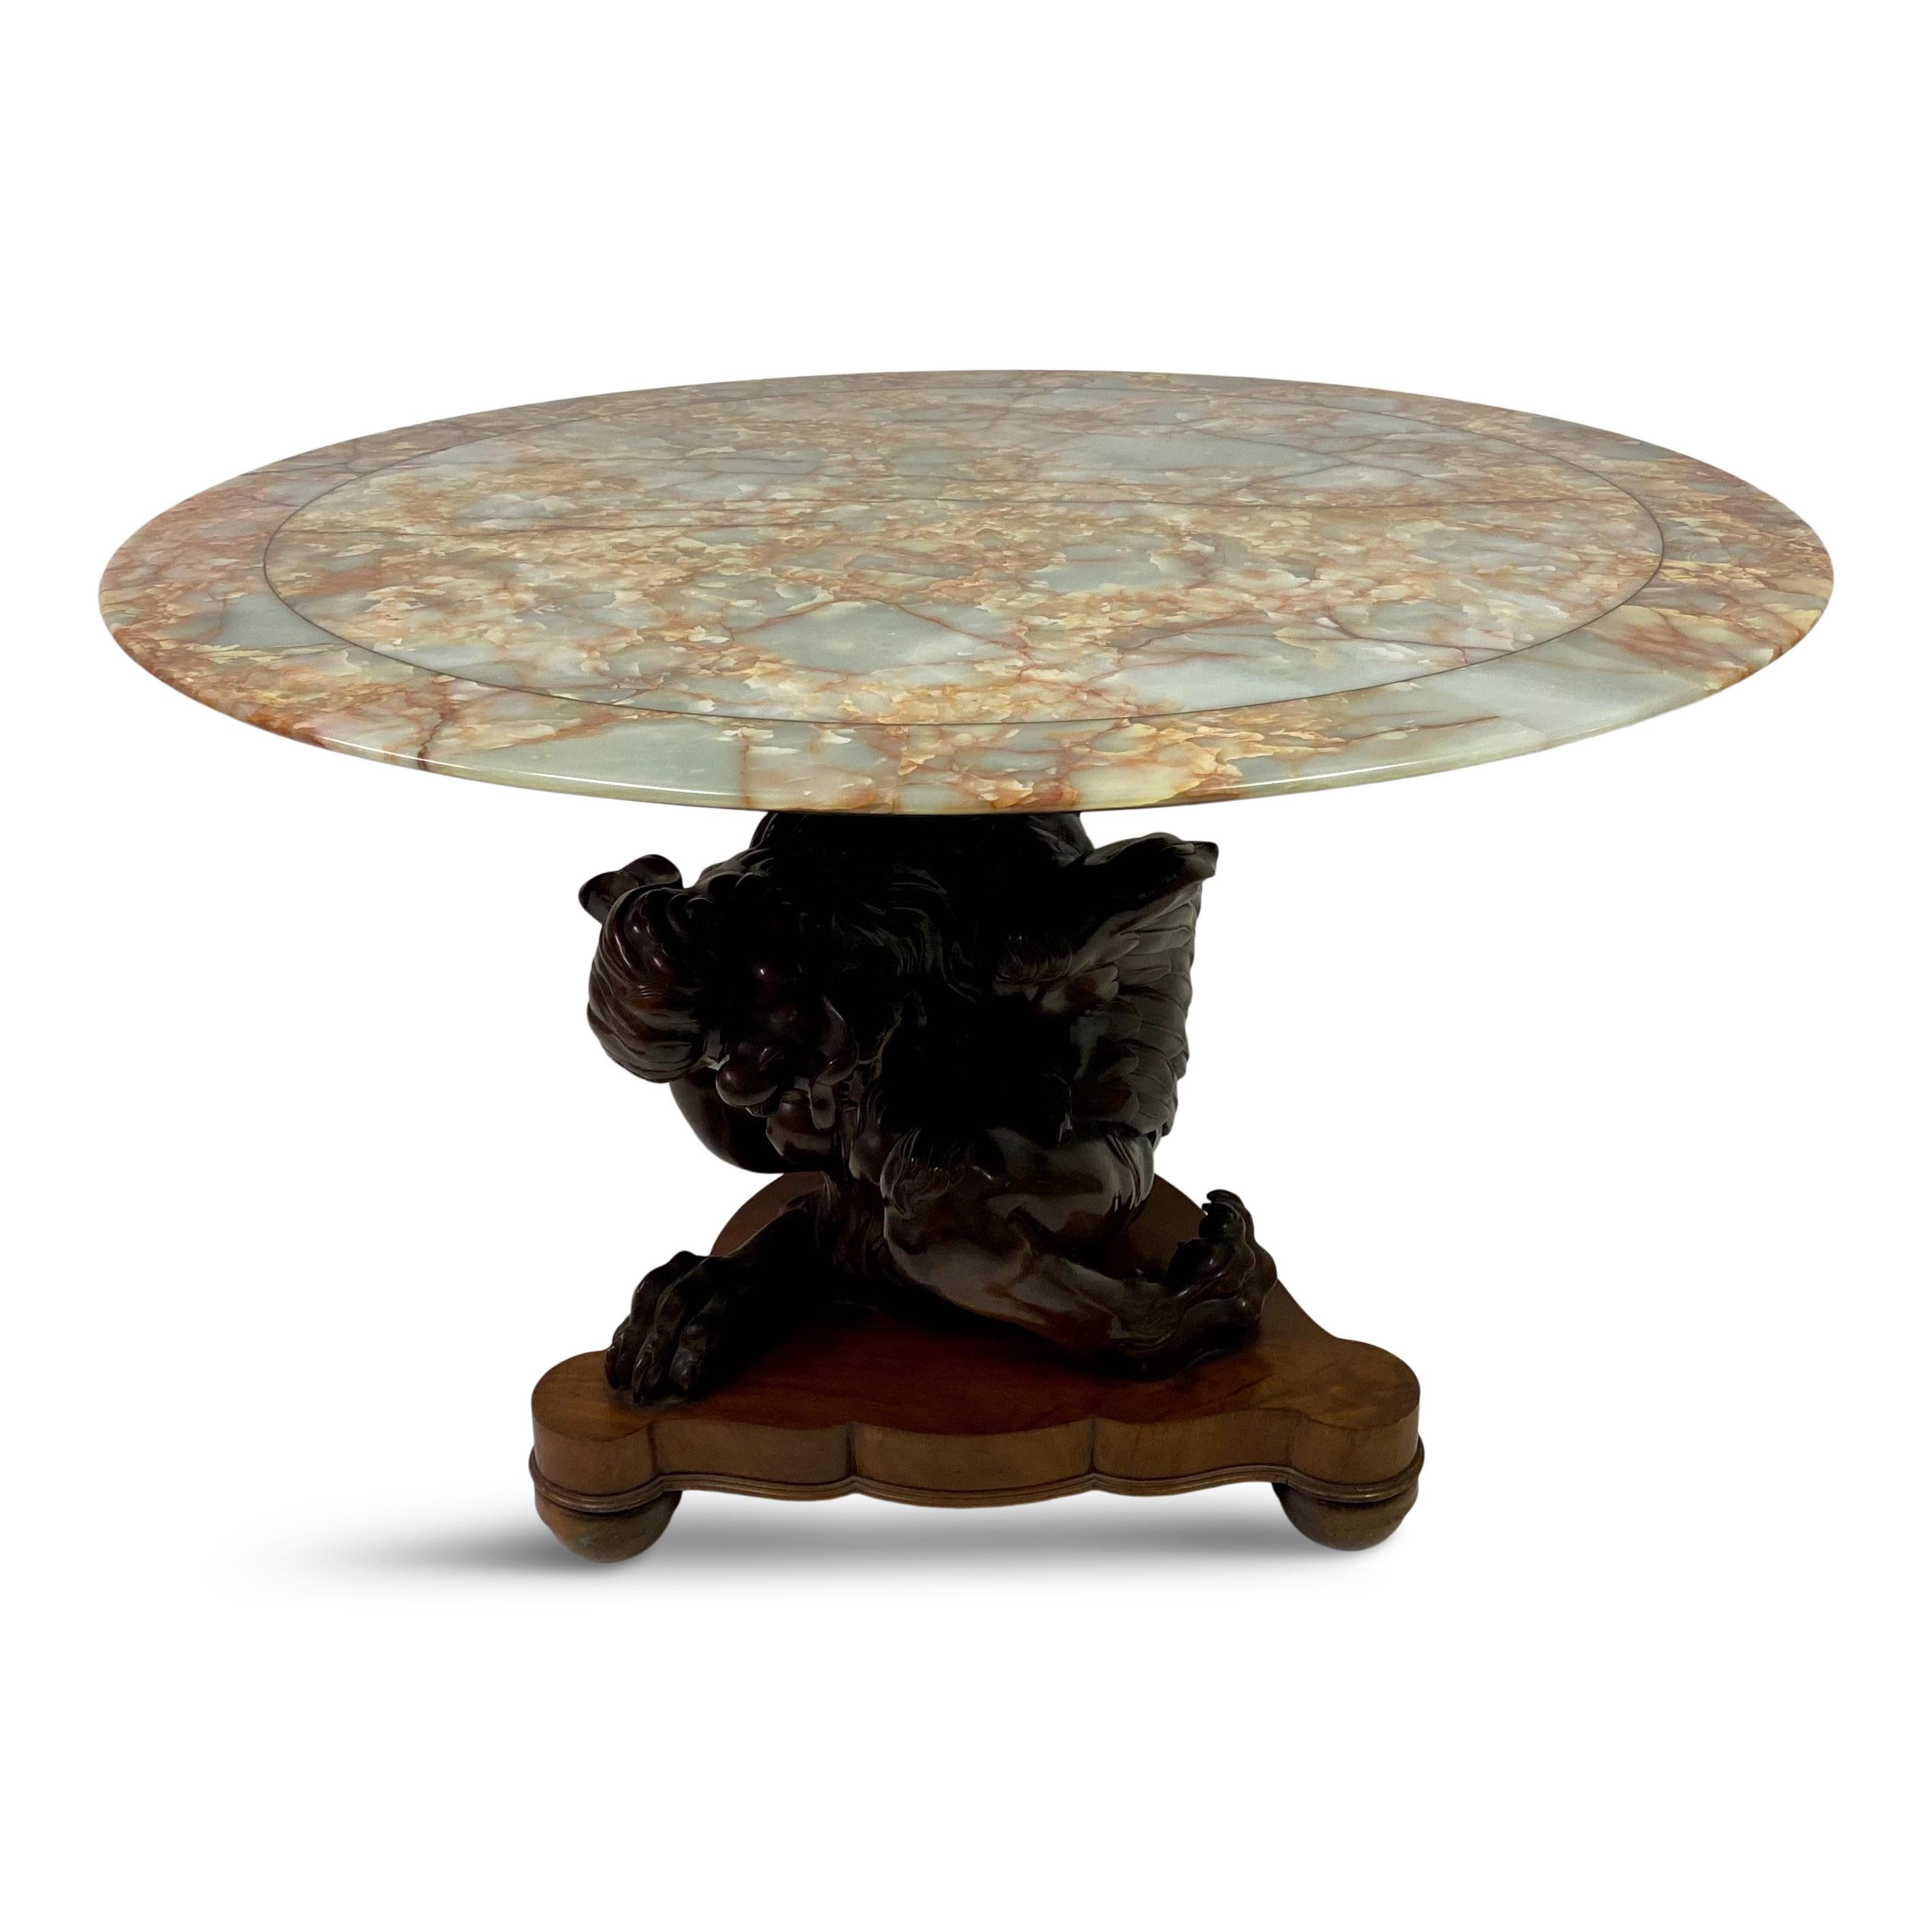 Italian Early 20th Century Centre Table with Distinctive Onyx Top